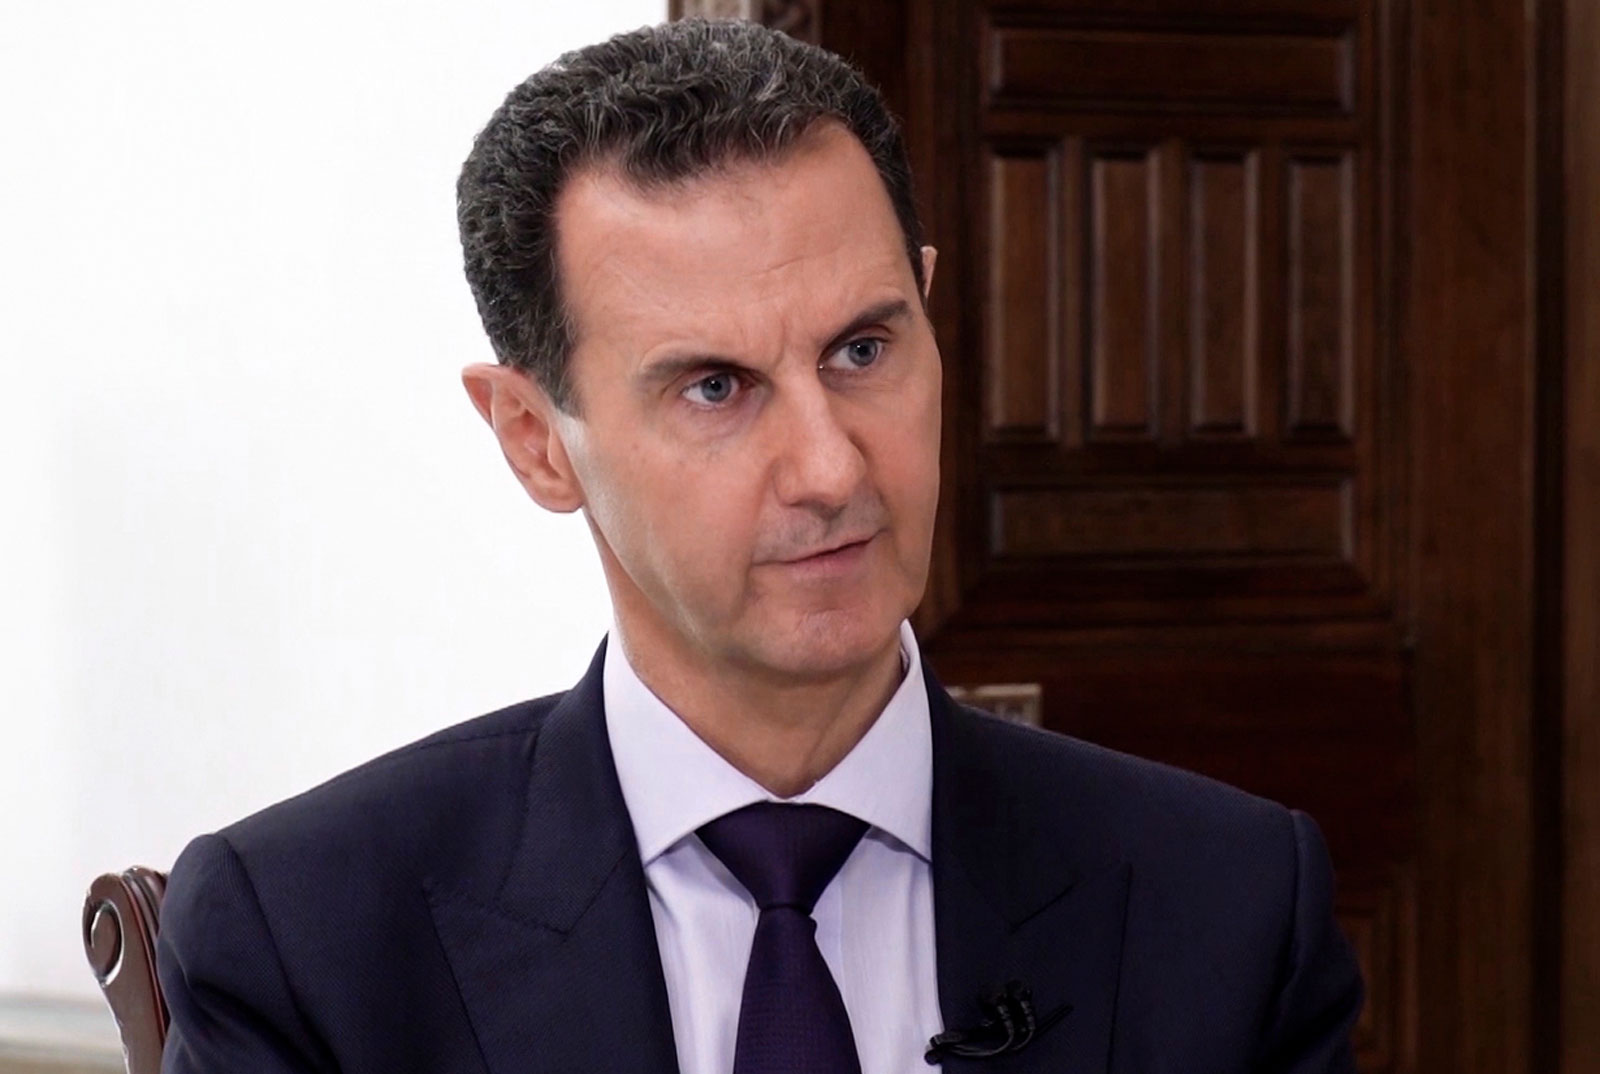 Syrian President Bashar al-Assad speaks during an interview with RIA Novosti on October 6 in Damascus, Syria.